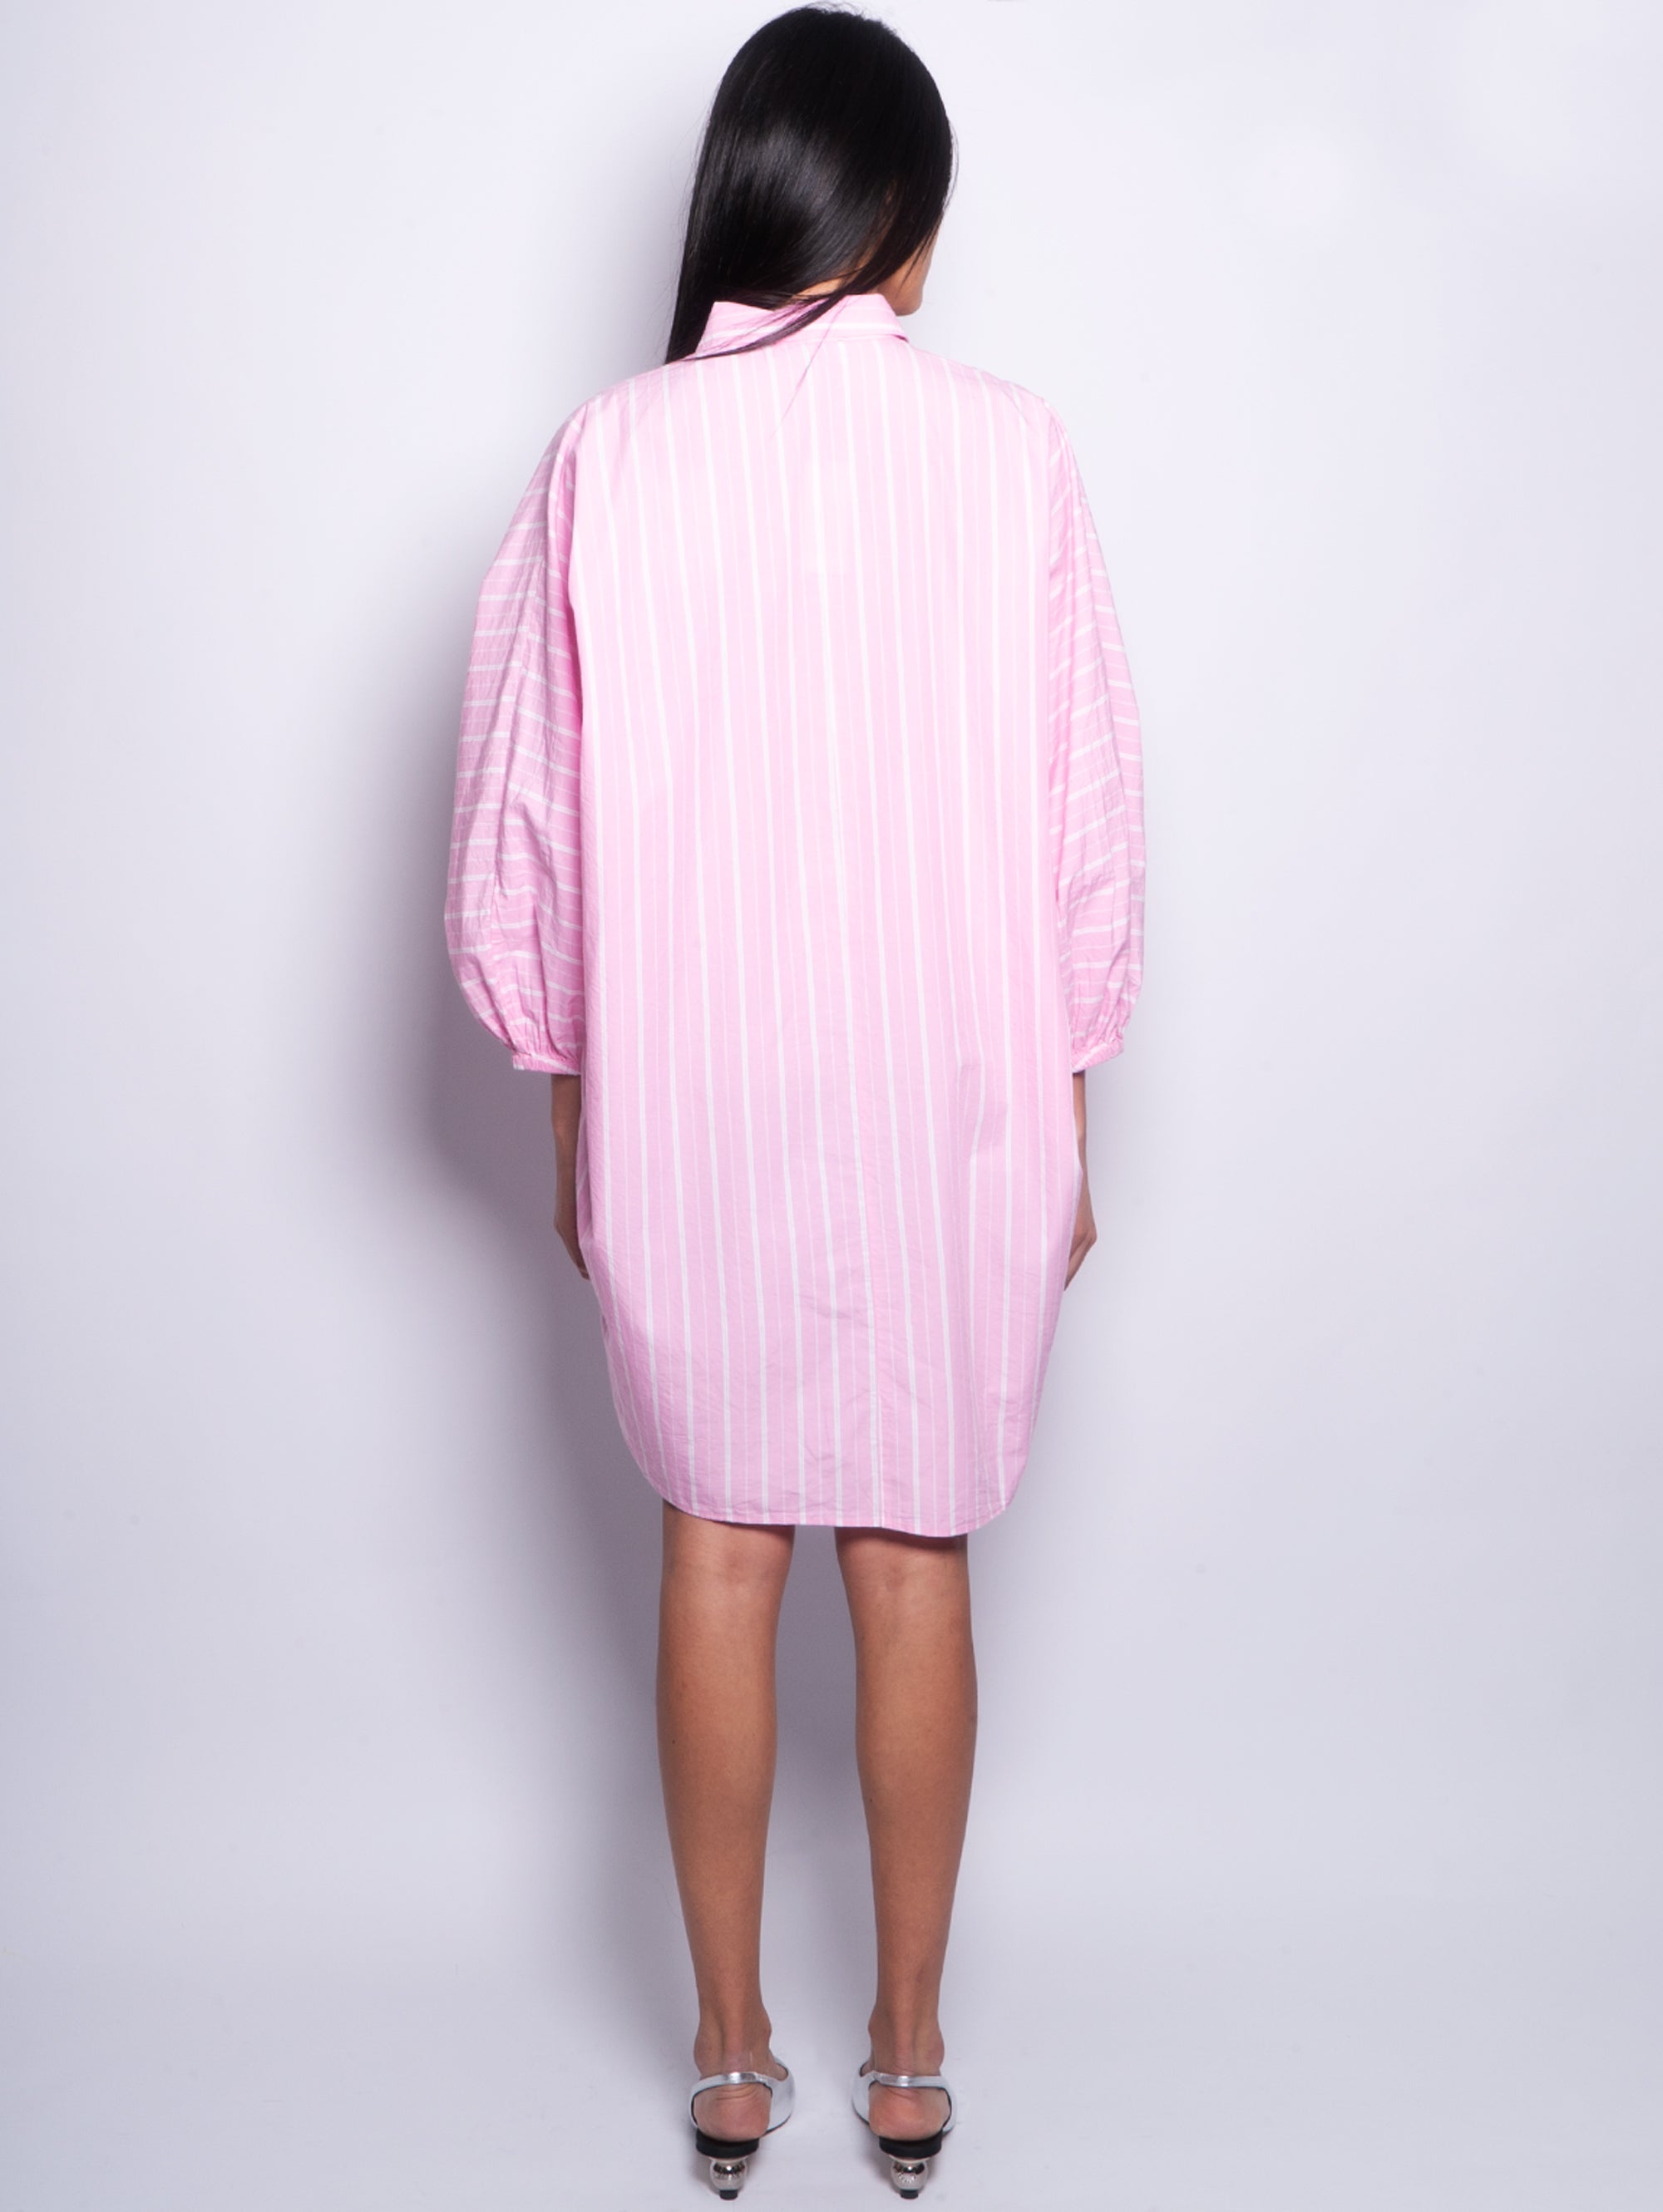 Striped shirt dress with pink embroidery